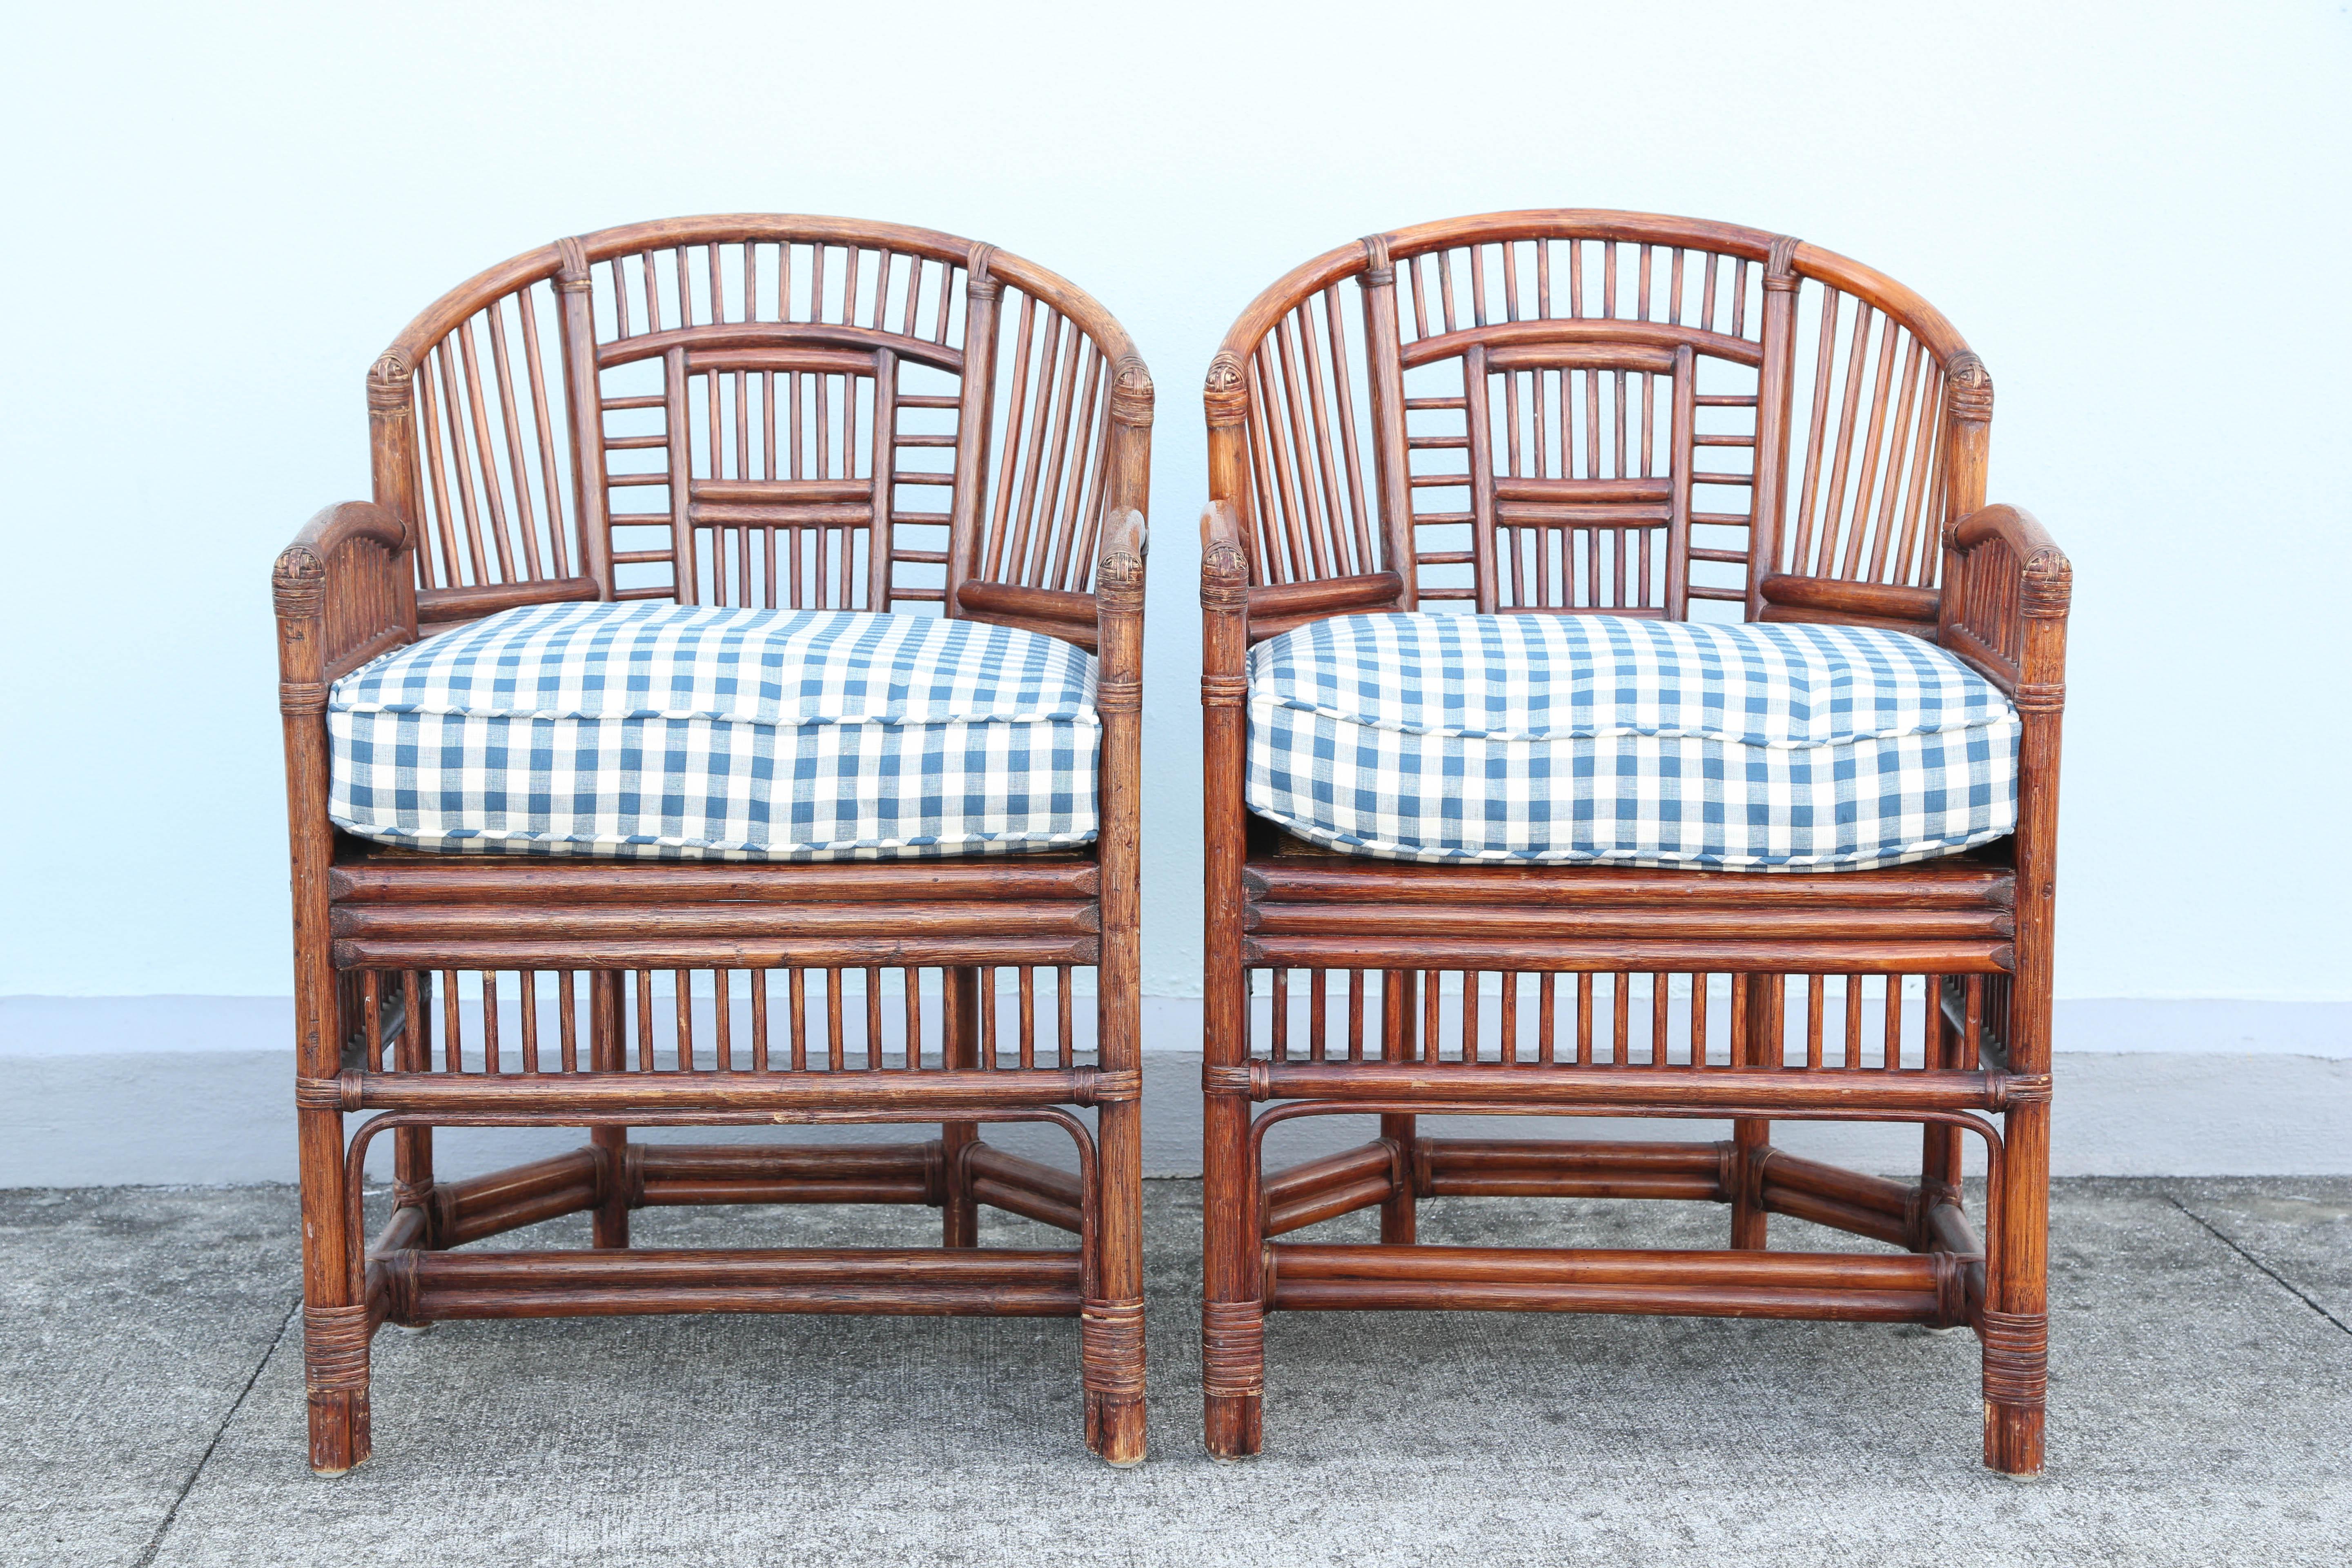 Pair of bamboo Brighton armchairs with cane seats and blue/white seat cushions.